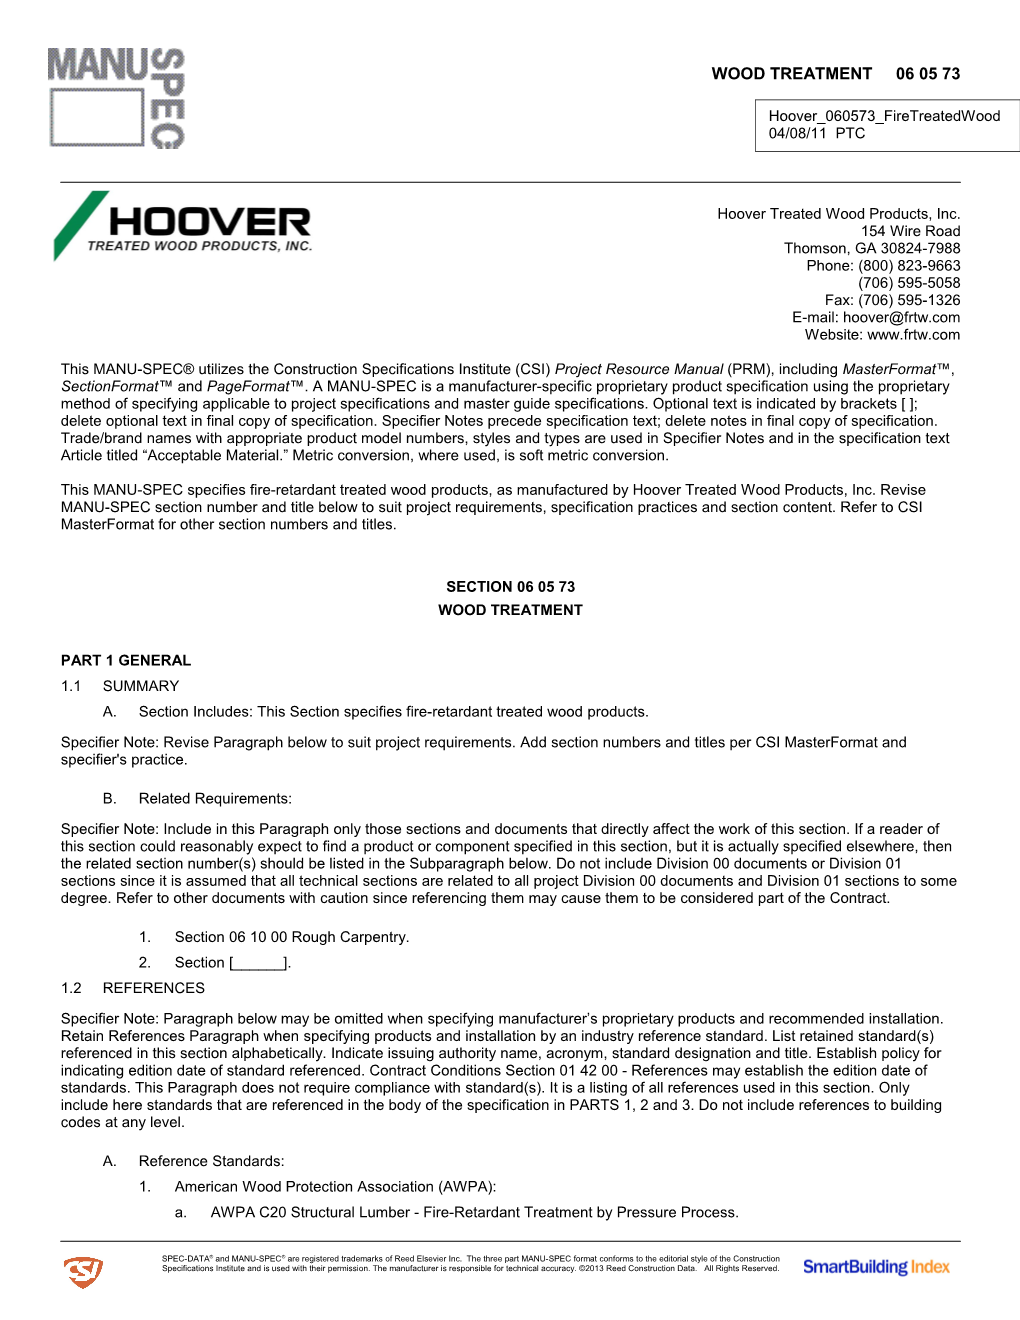 Hoover Treated Wood Products, Inc